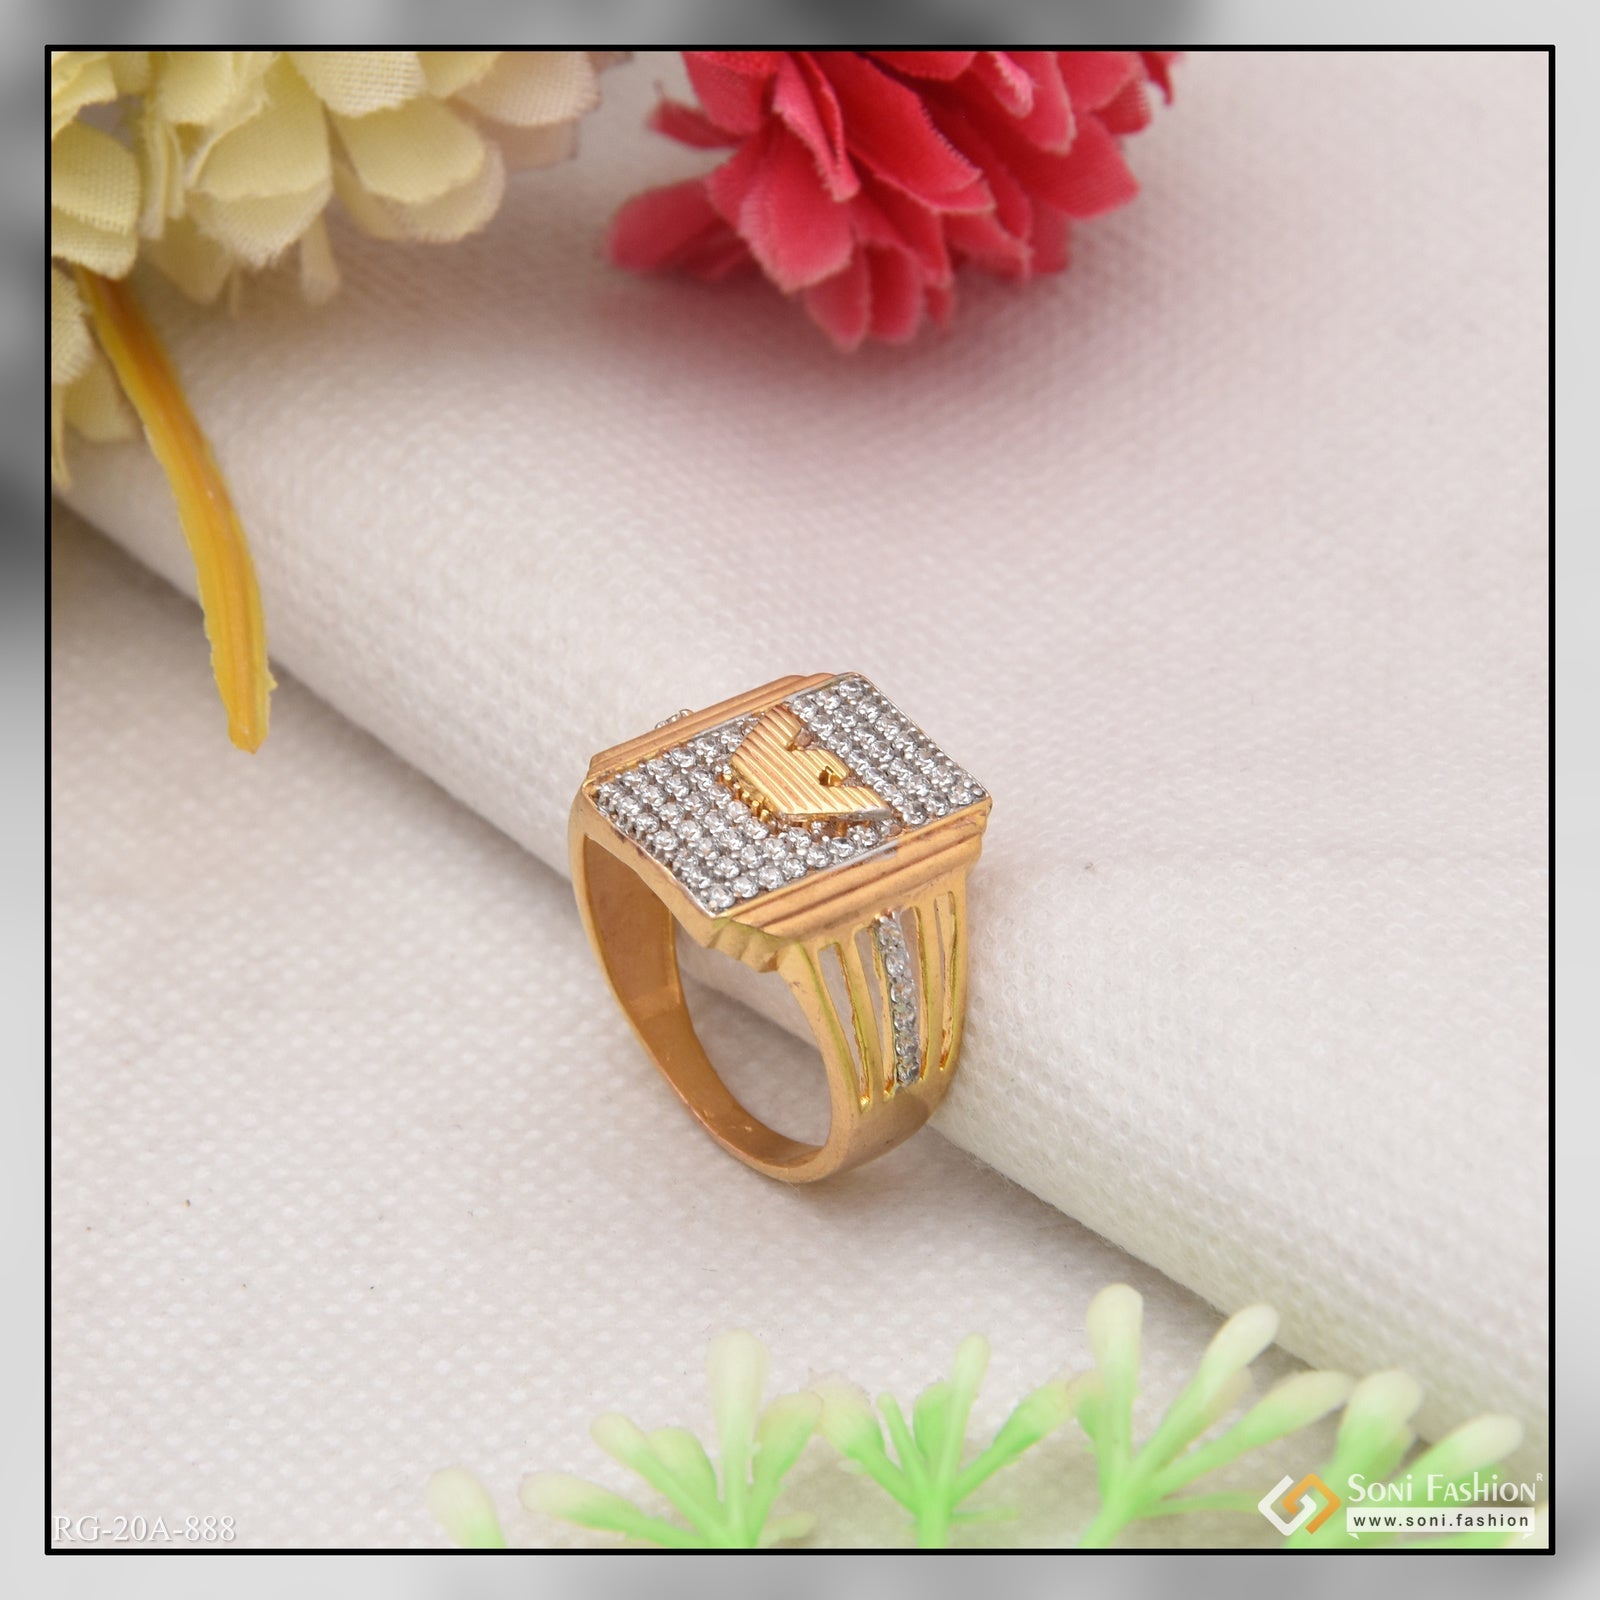 1 Gram Gold Forming Attention-Getting Design with Diamond Ring for Men - Style A888